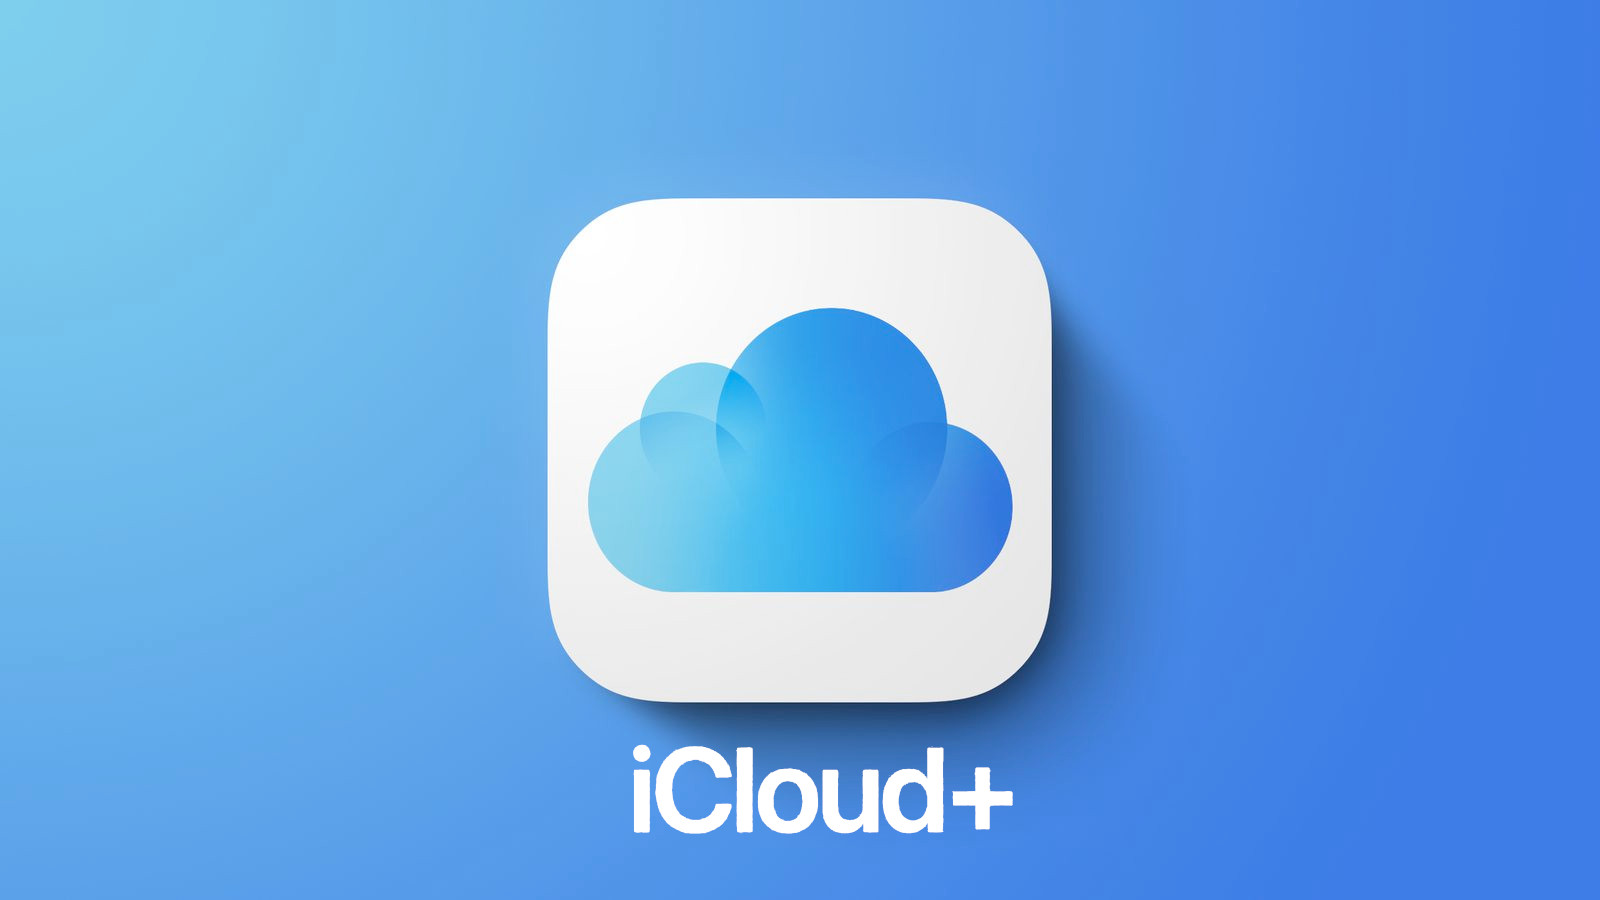 iCloud+ 50GB - 3 Months Trial Subscription US (ONLY FOR NEW ACCOUNTS) 0.31 $